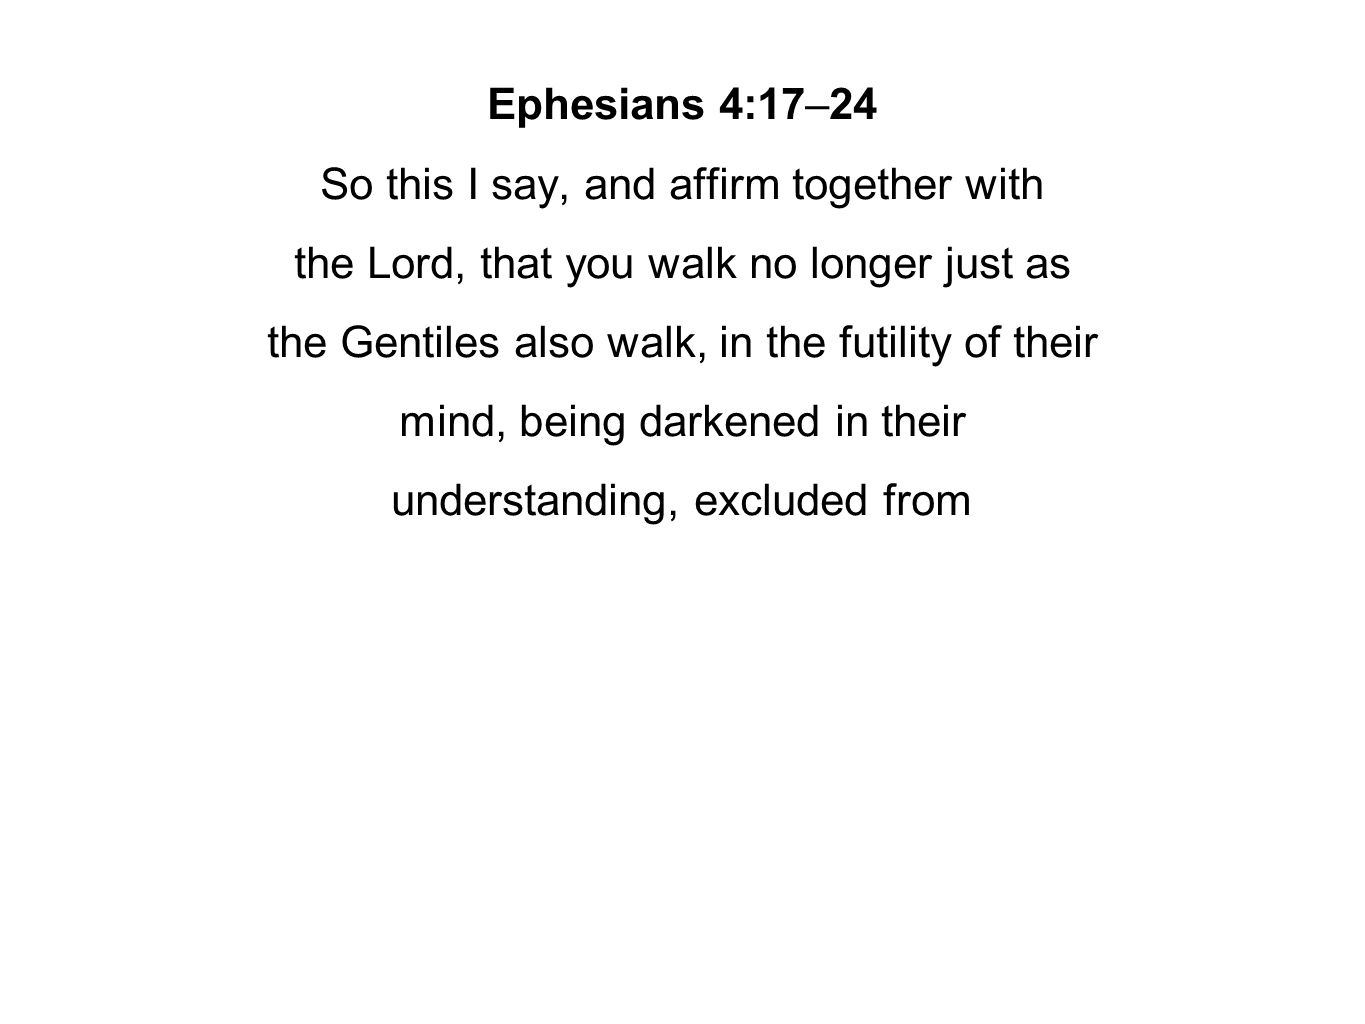 Ephesians 4:17–24 So this I say, and affirm together with the Lord, that you walk no longer just as the Gentiles also walk, in the futility of their mind, being darkened in their understanding, excluded from